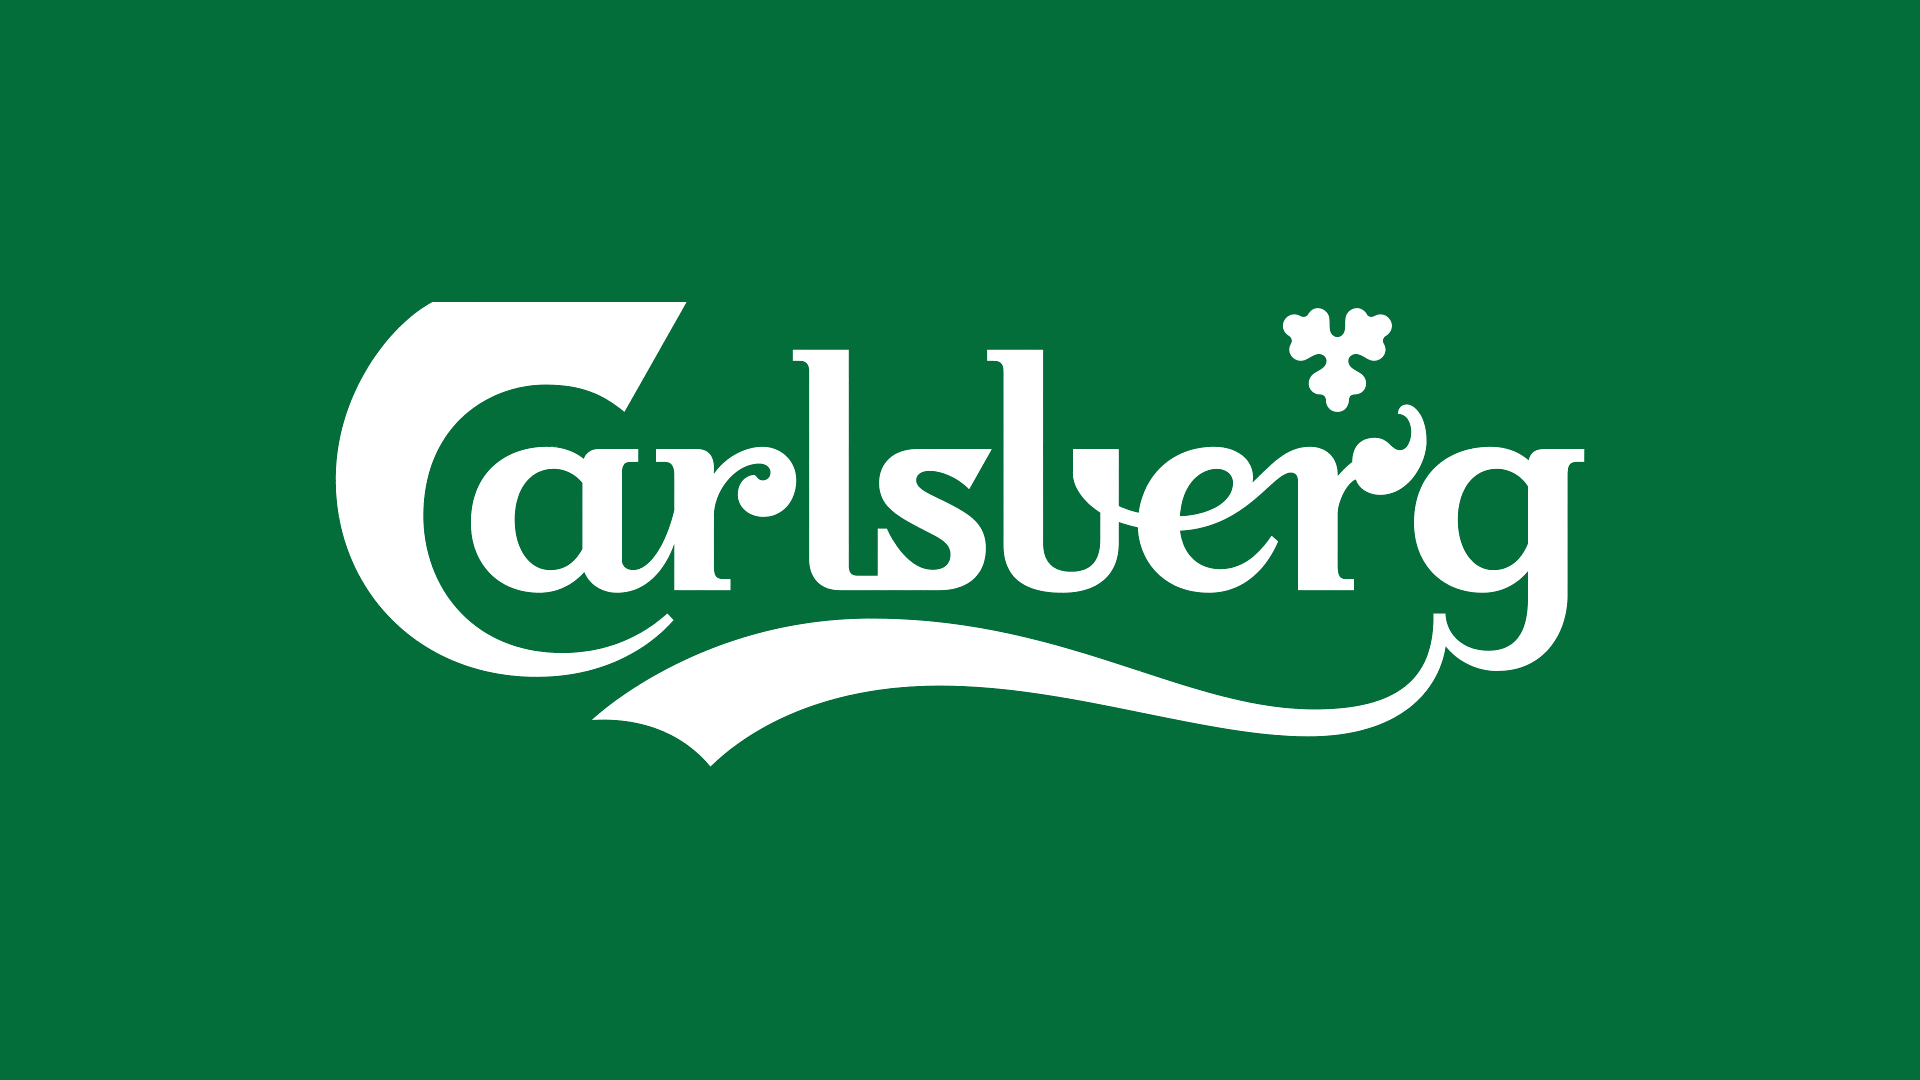 Most Popular Green Logo - Brand New: New Logo and Packaging for Carlsberg by Taxi Studio